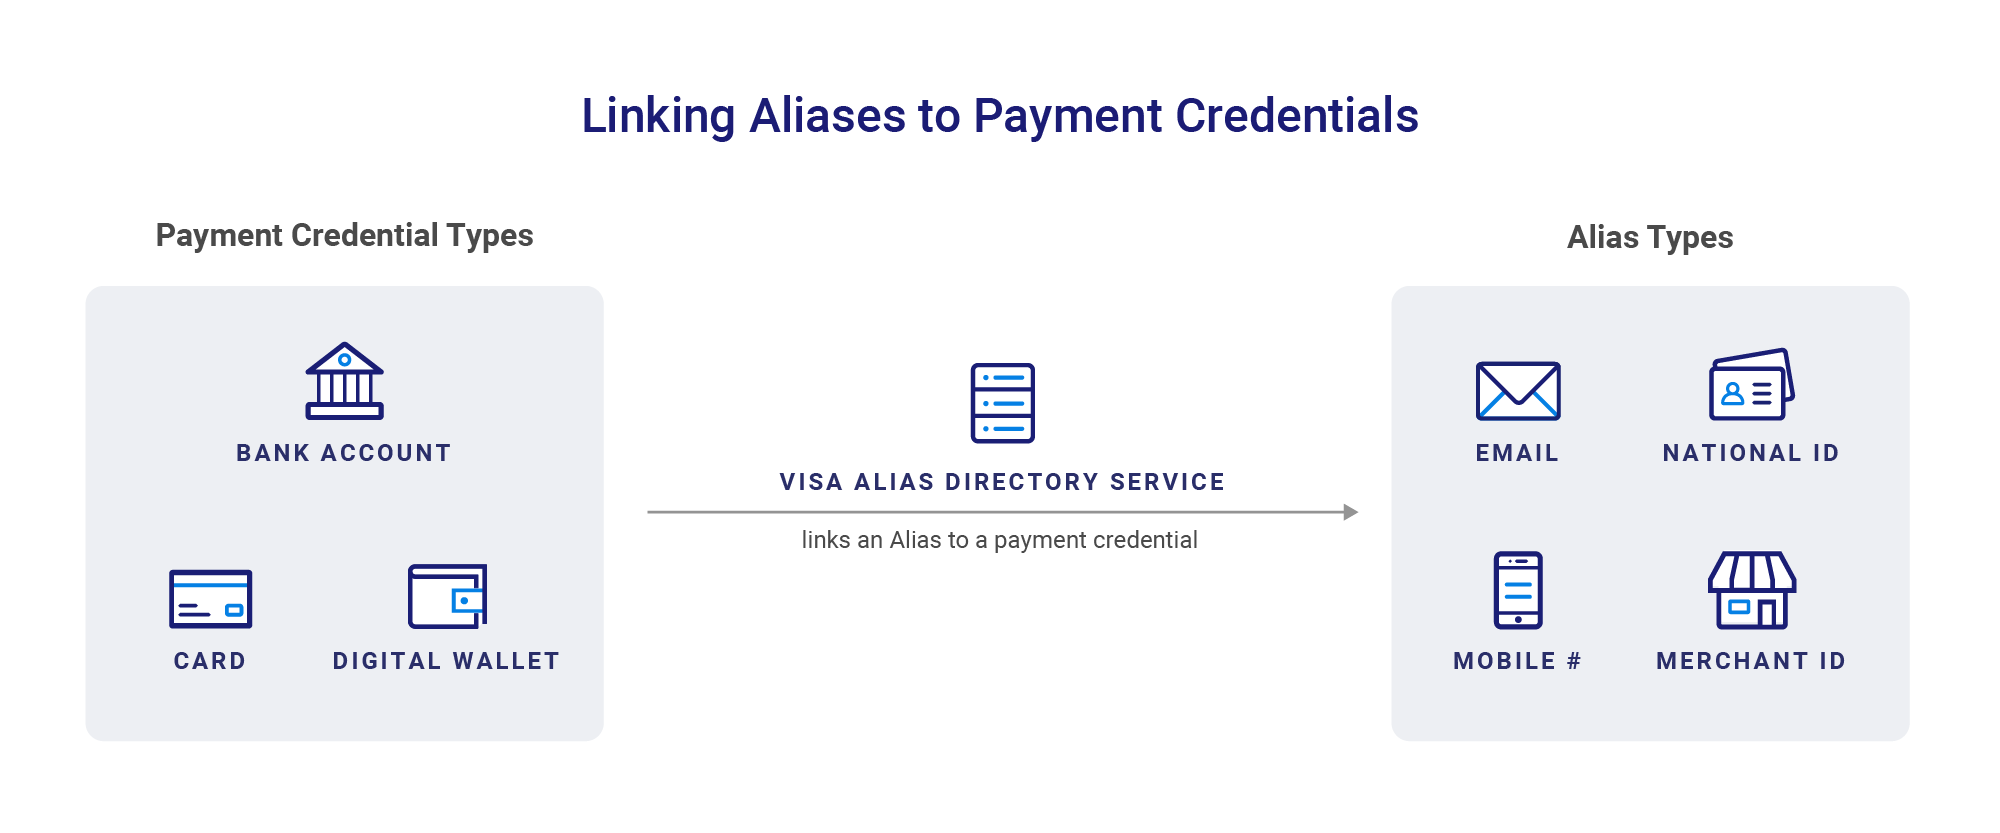 Infographic demonstrating credential and alias types that can be linked together by Visa Alias Directory Service. Examples of payment credentials are bank accounts, cards, and digital wallets. Examples of Alias types are emails, national IDs, mobile numbers, and merchant IDs.